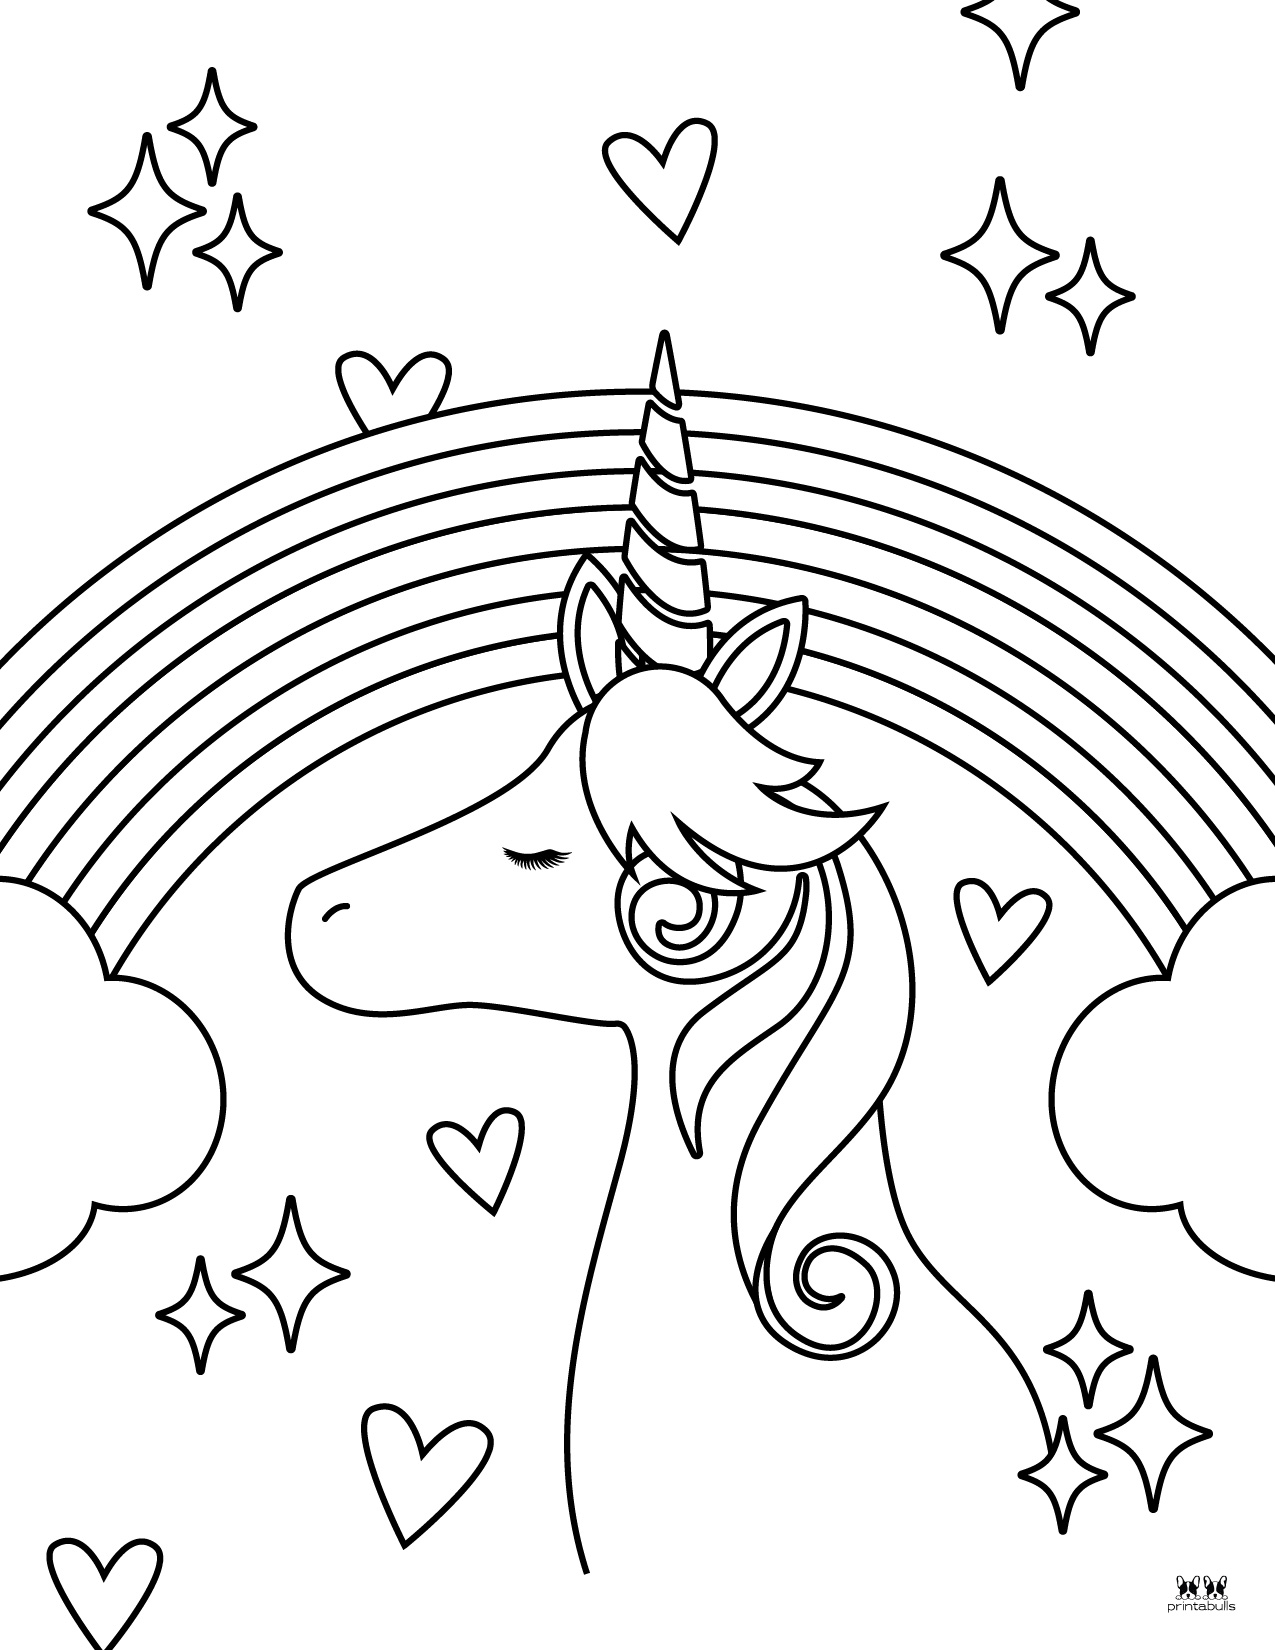 Rainbow Coloring Pages 50 FREE Printable Pages Printabulls